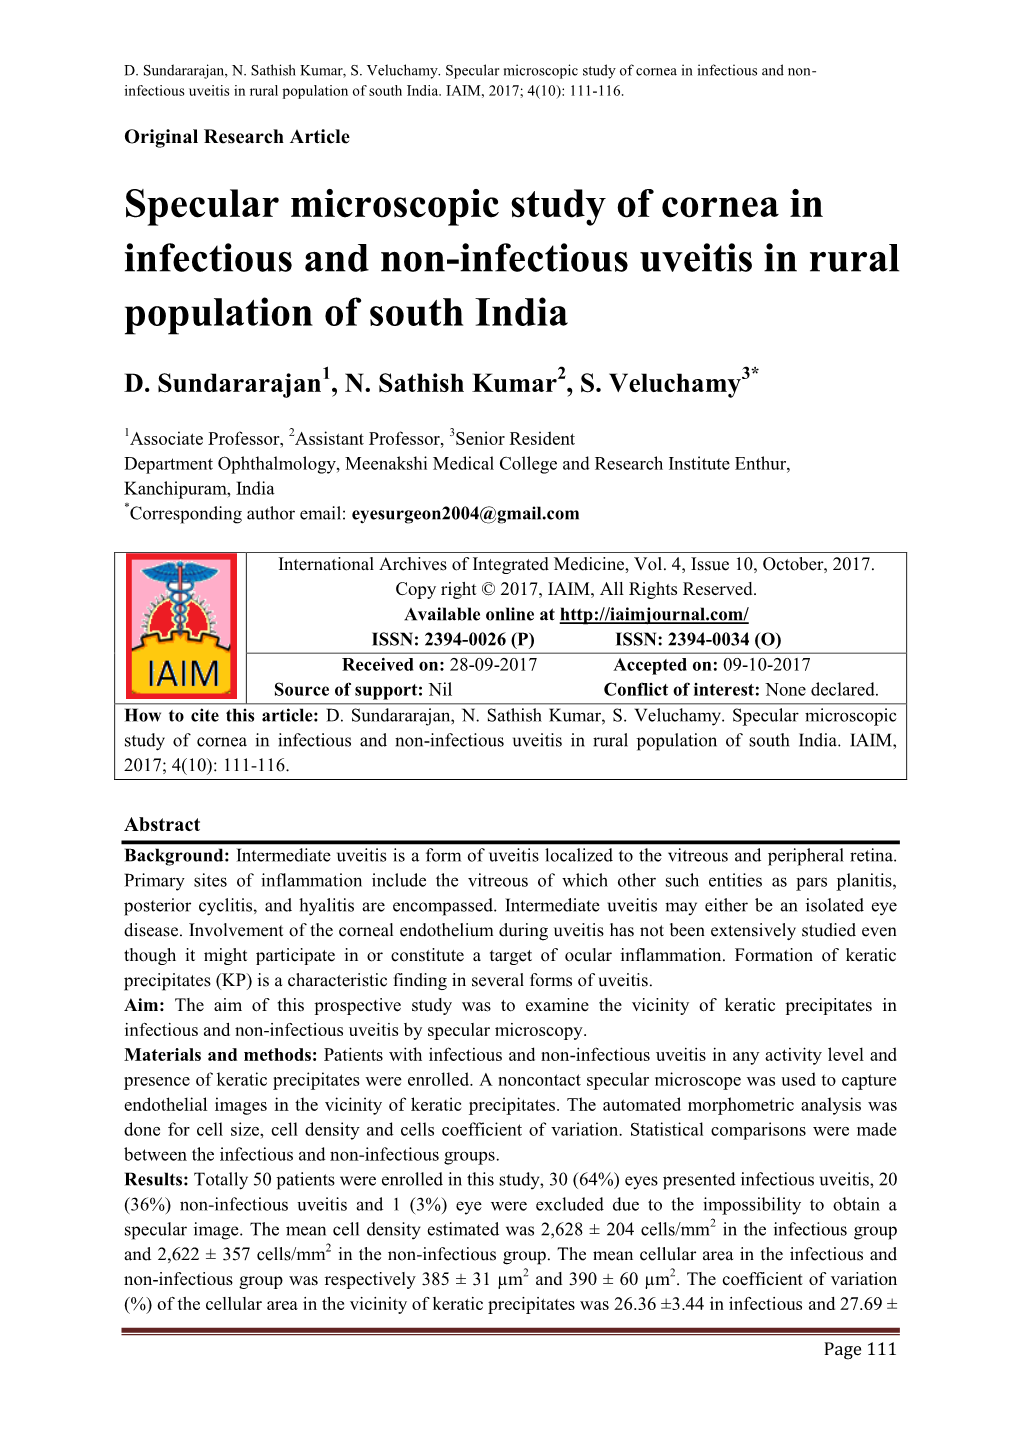 Specular Microscopic Study of Cornea in Infectious and Non-Infectious Uveitis in Rural Population of South India